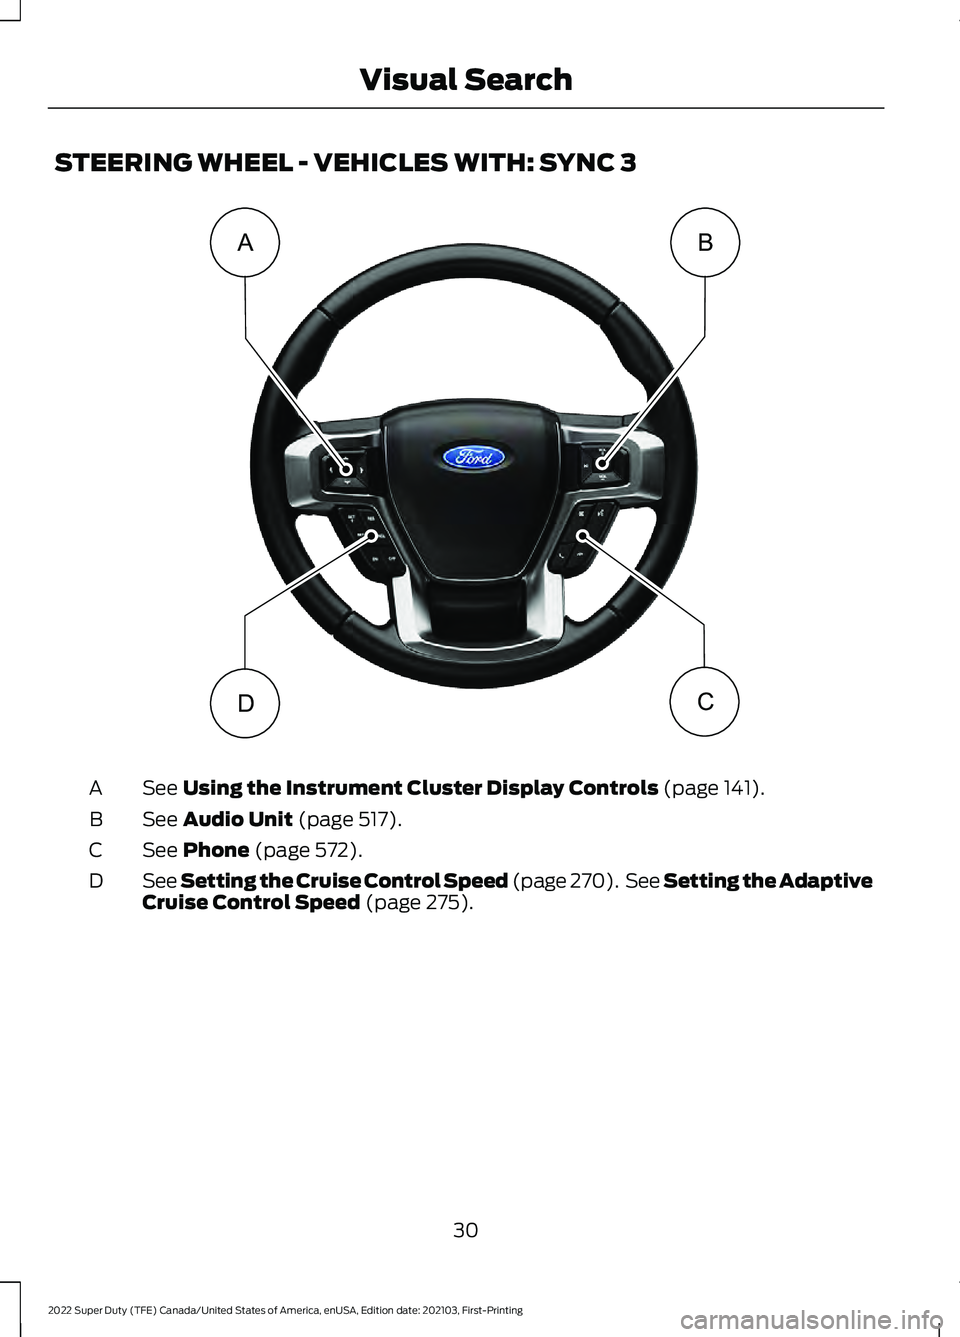 FORD F-450 2022 Owners Guide STEERING WHEEL - VEHICLES WITH: SYNC 3
See Using the Instrument Cluster Display Controls (page 141).
A
See 
Audio Unit (page 517).
B
See 
Phone (page 572).
C
See Setting the Cruise Control Speed (page